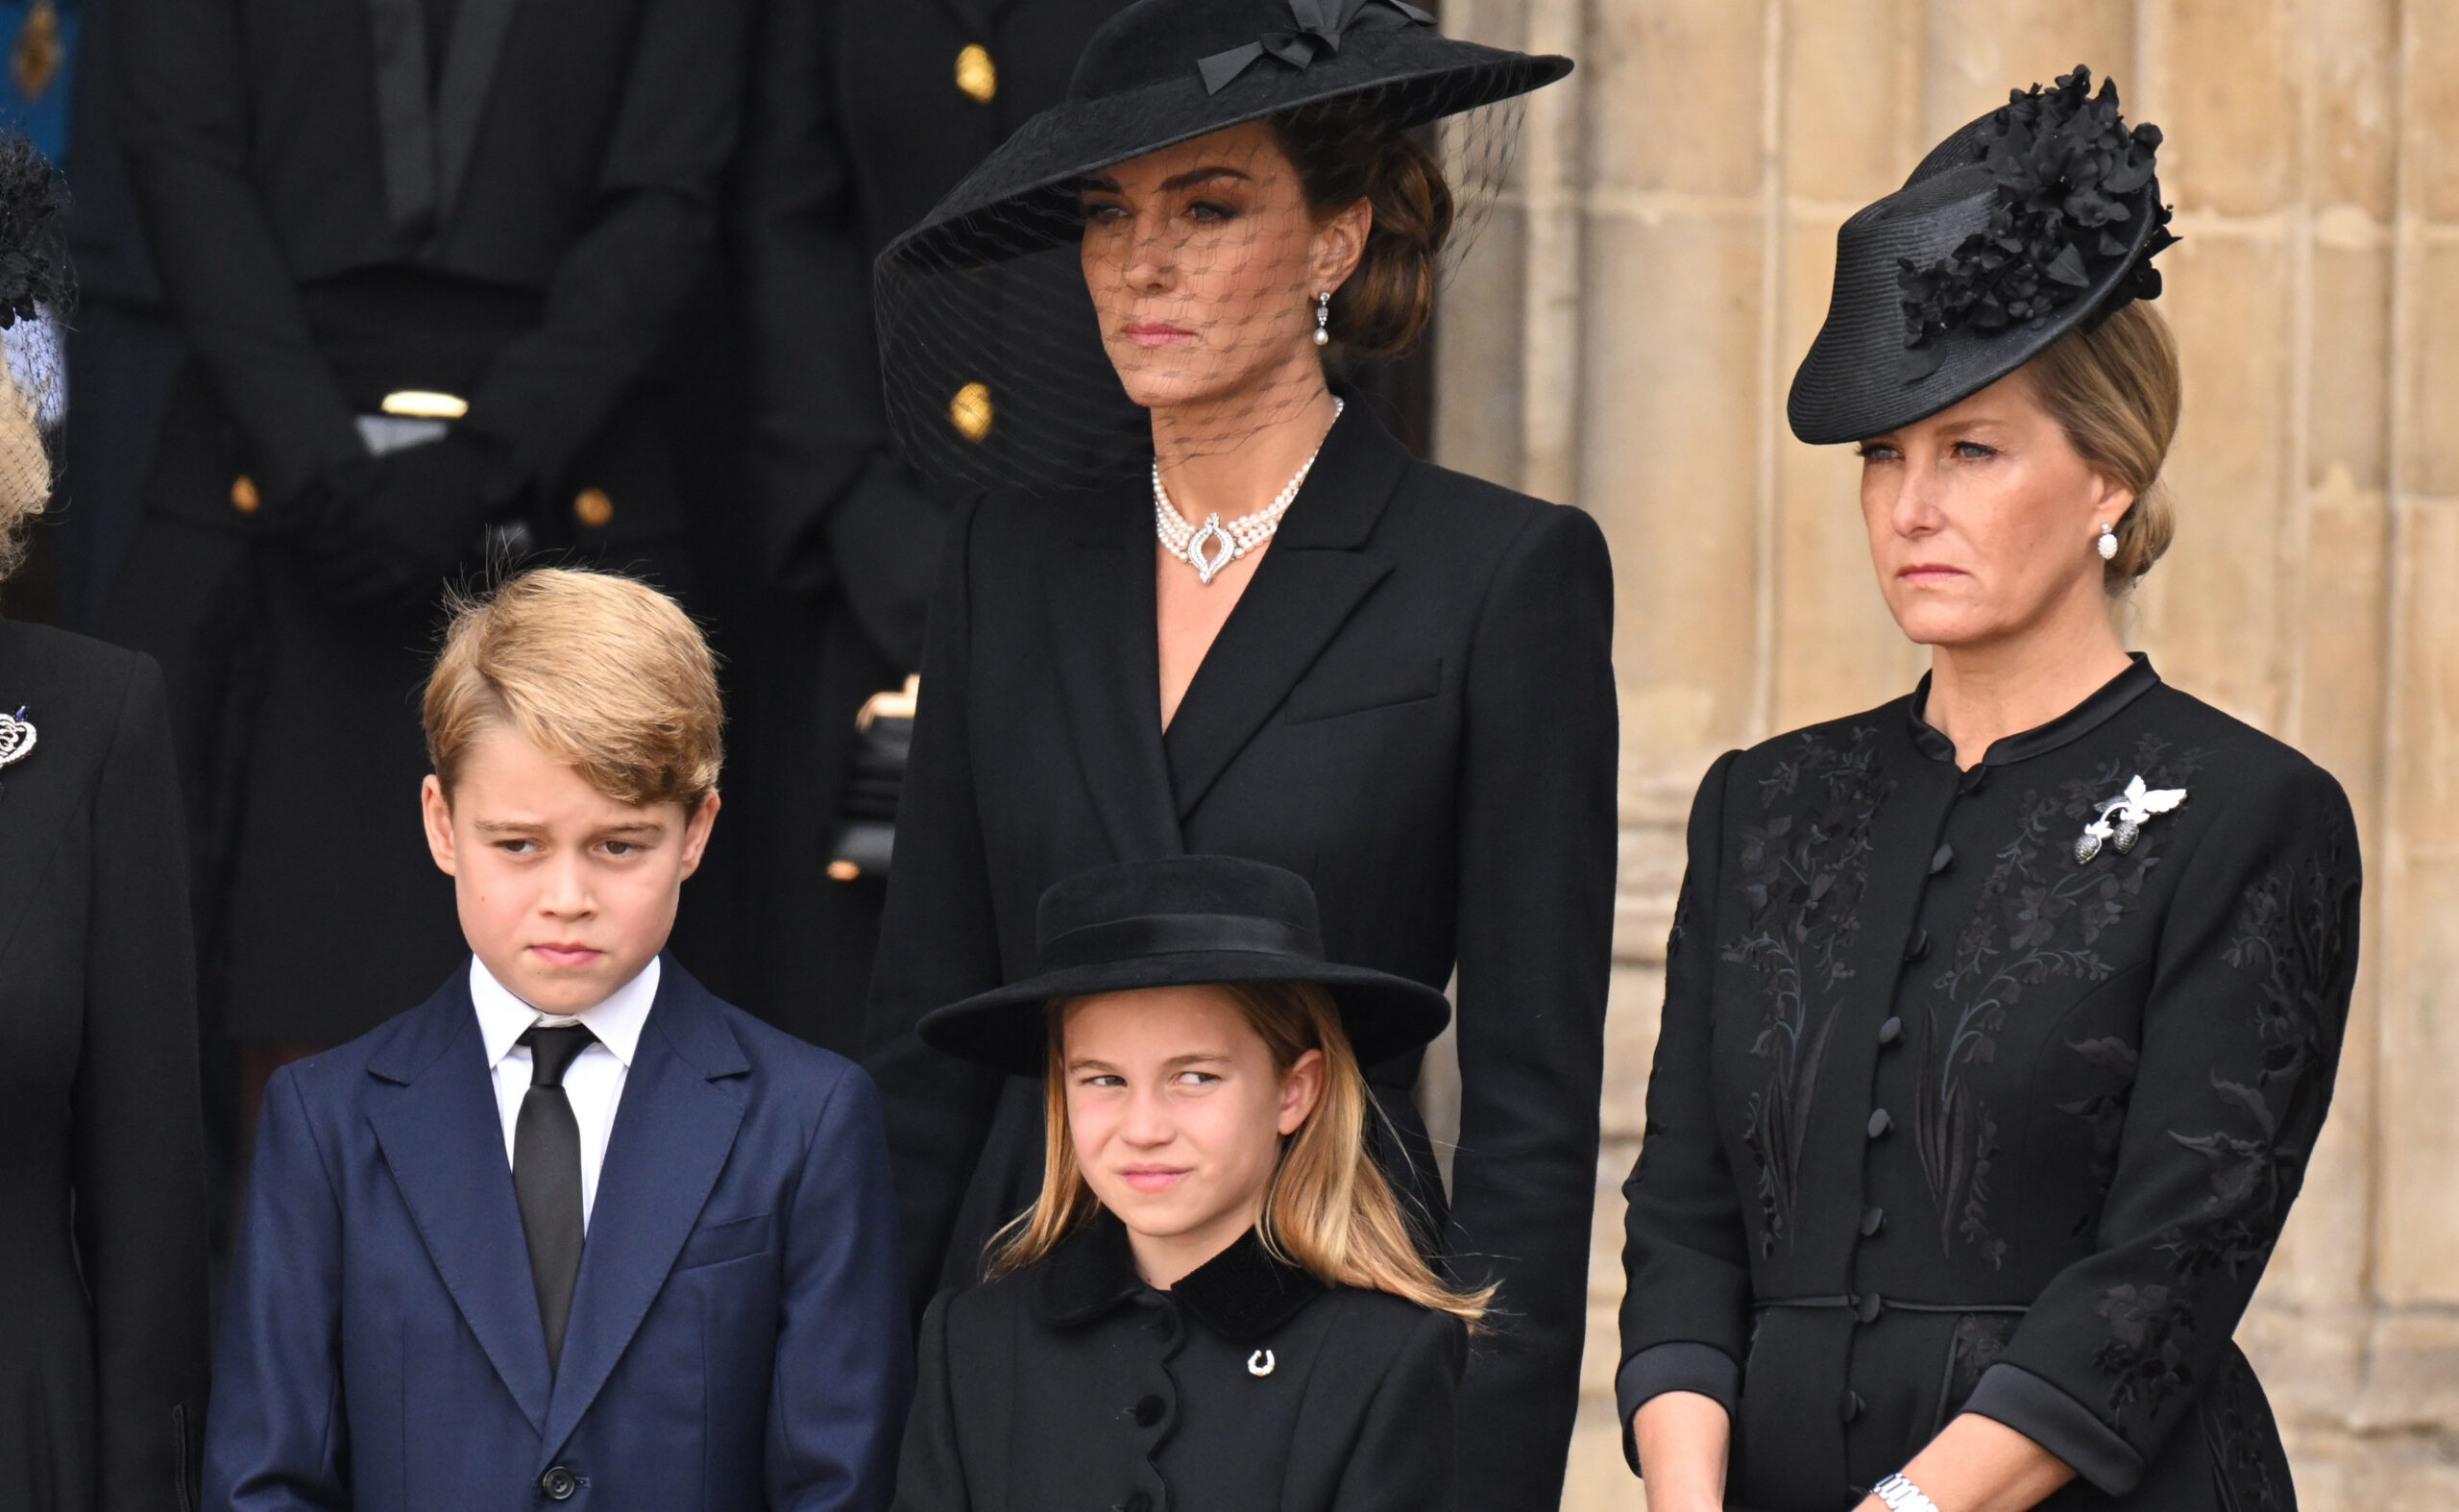 “No guidance”: Inside Prince George and Princess Charlotte’s standout moment at the Queen’s funeral